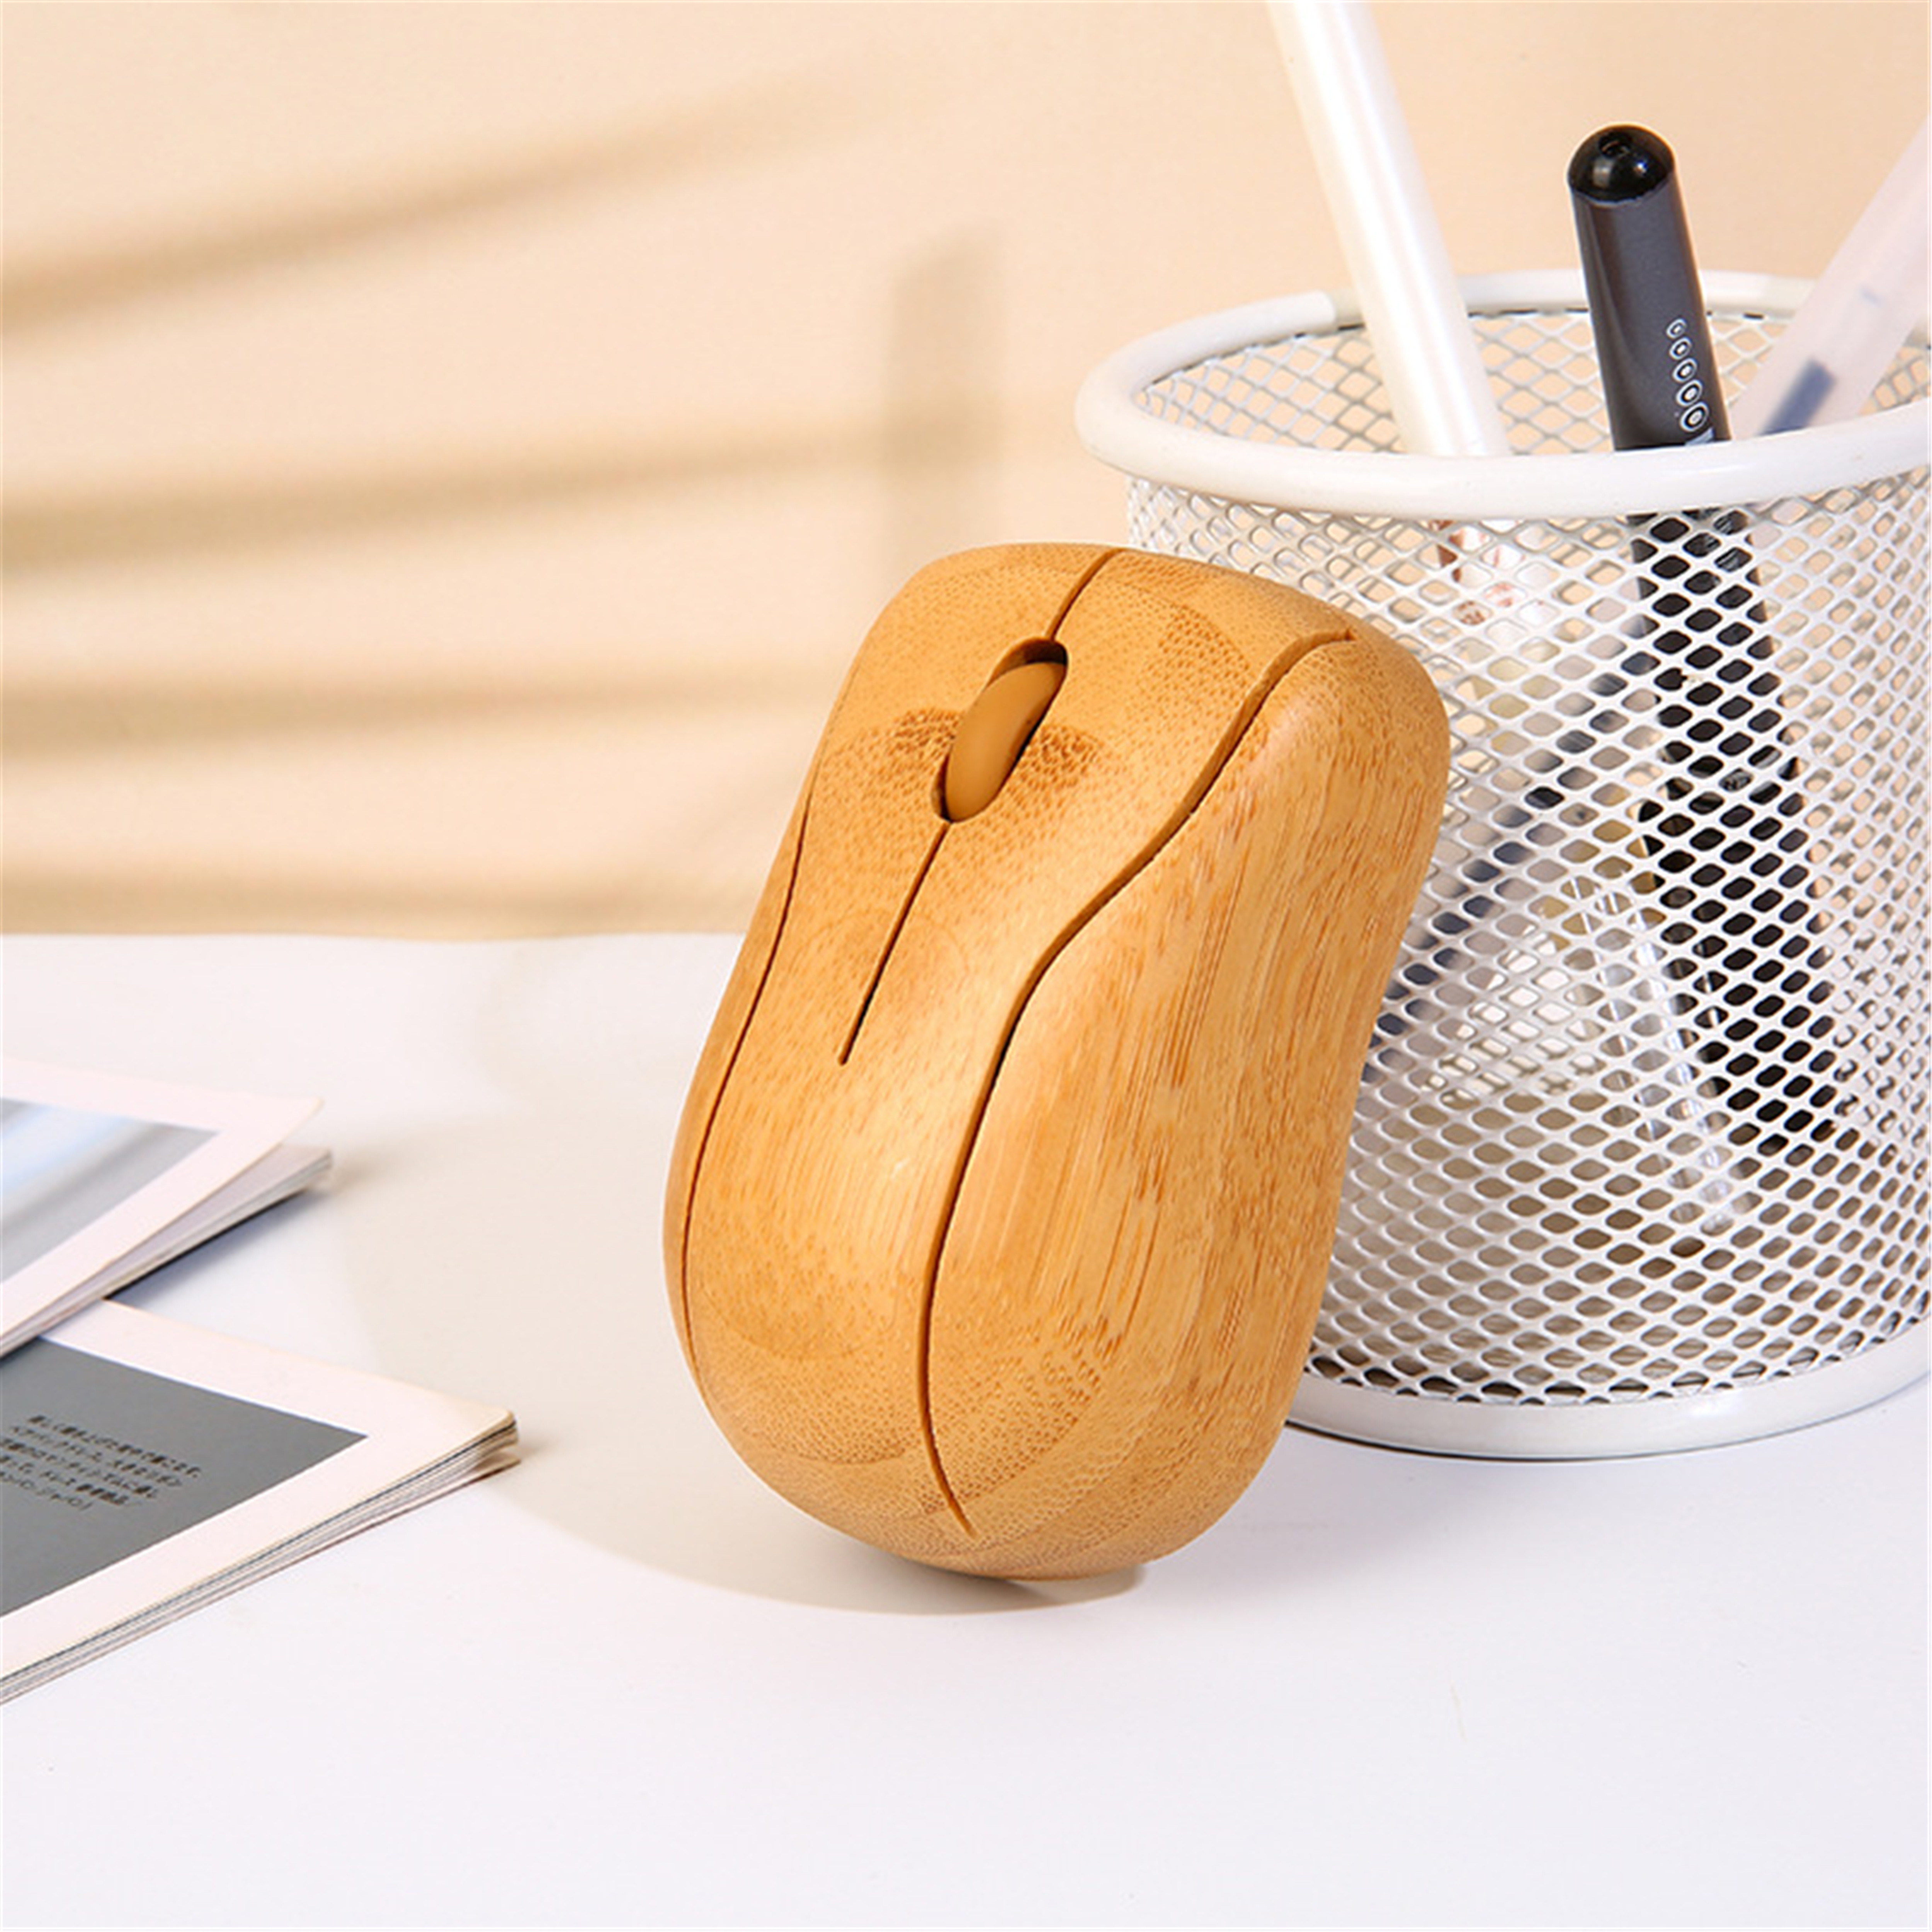 Creative bamboo wood wireless mouse office home wireless mouse laptop bamboo mouse